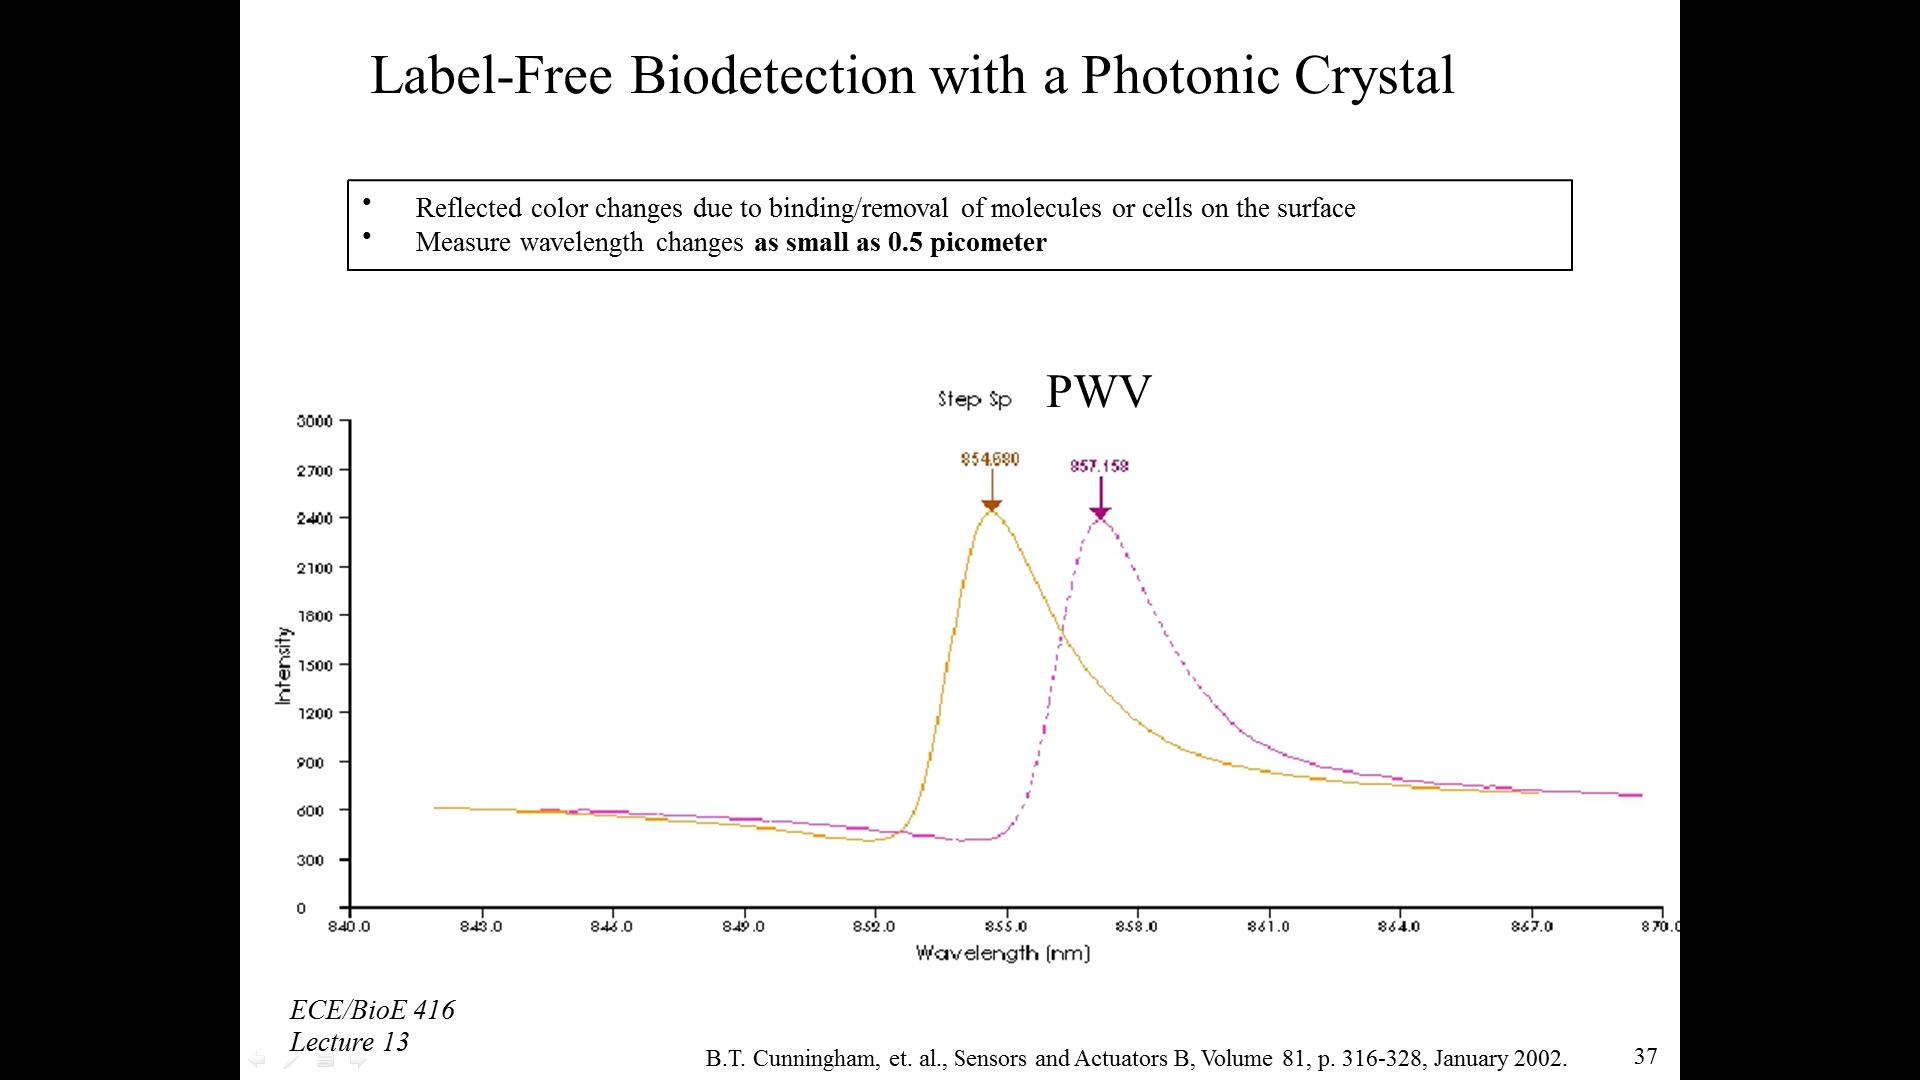 Label-Free Biodetection with a Photonic Crystal